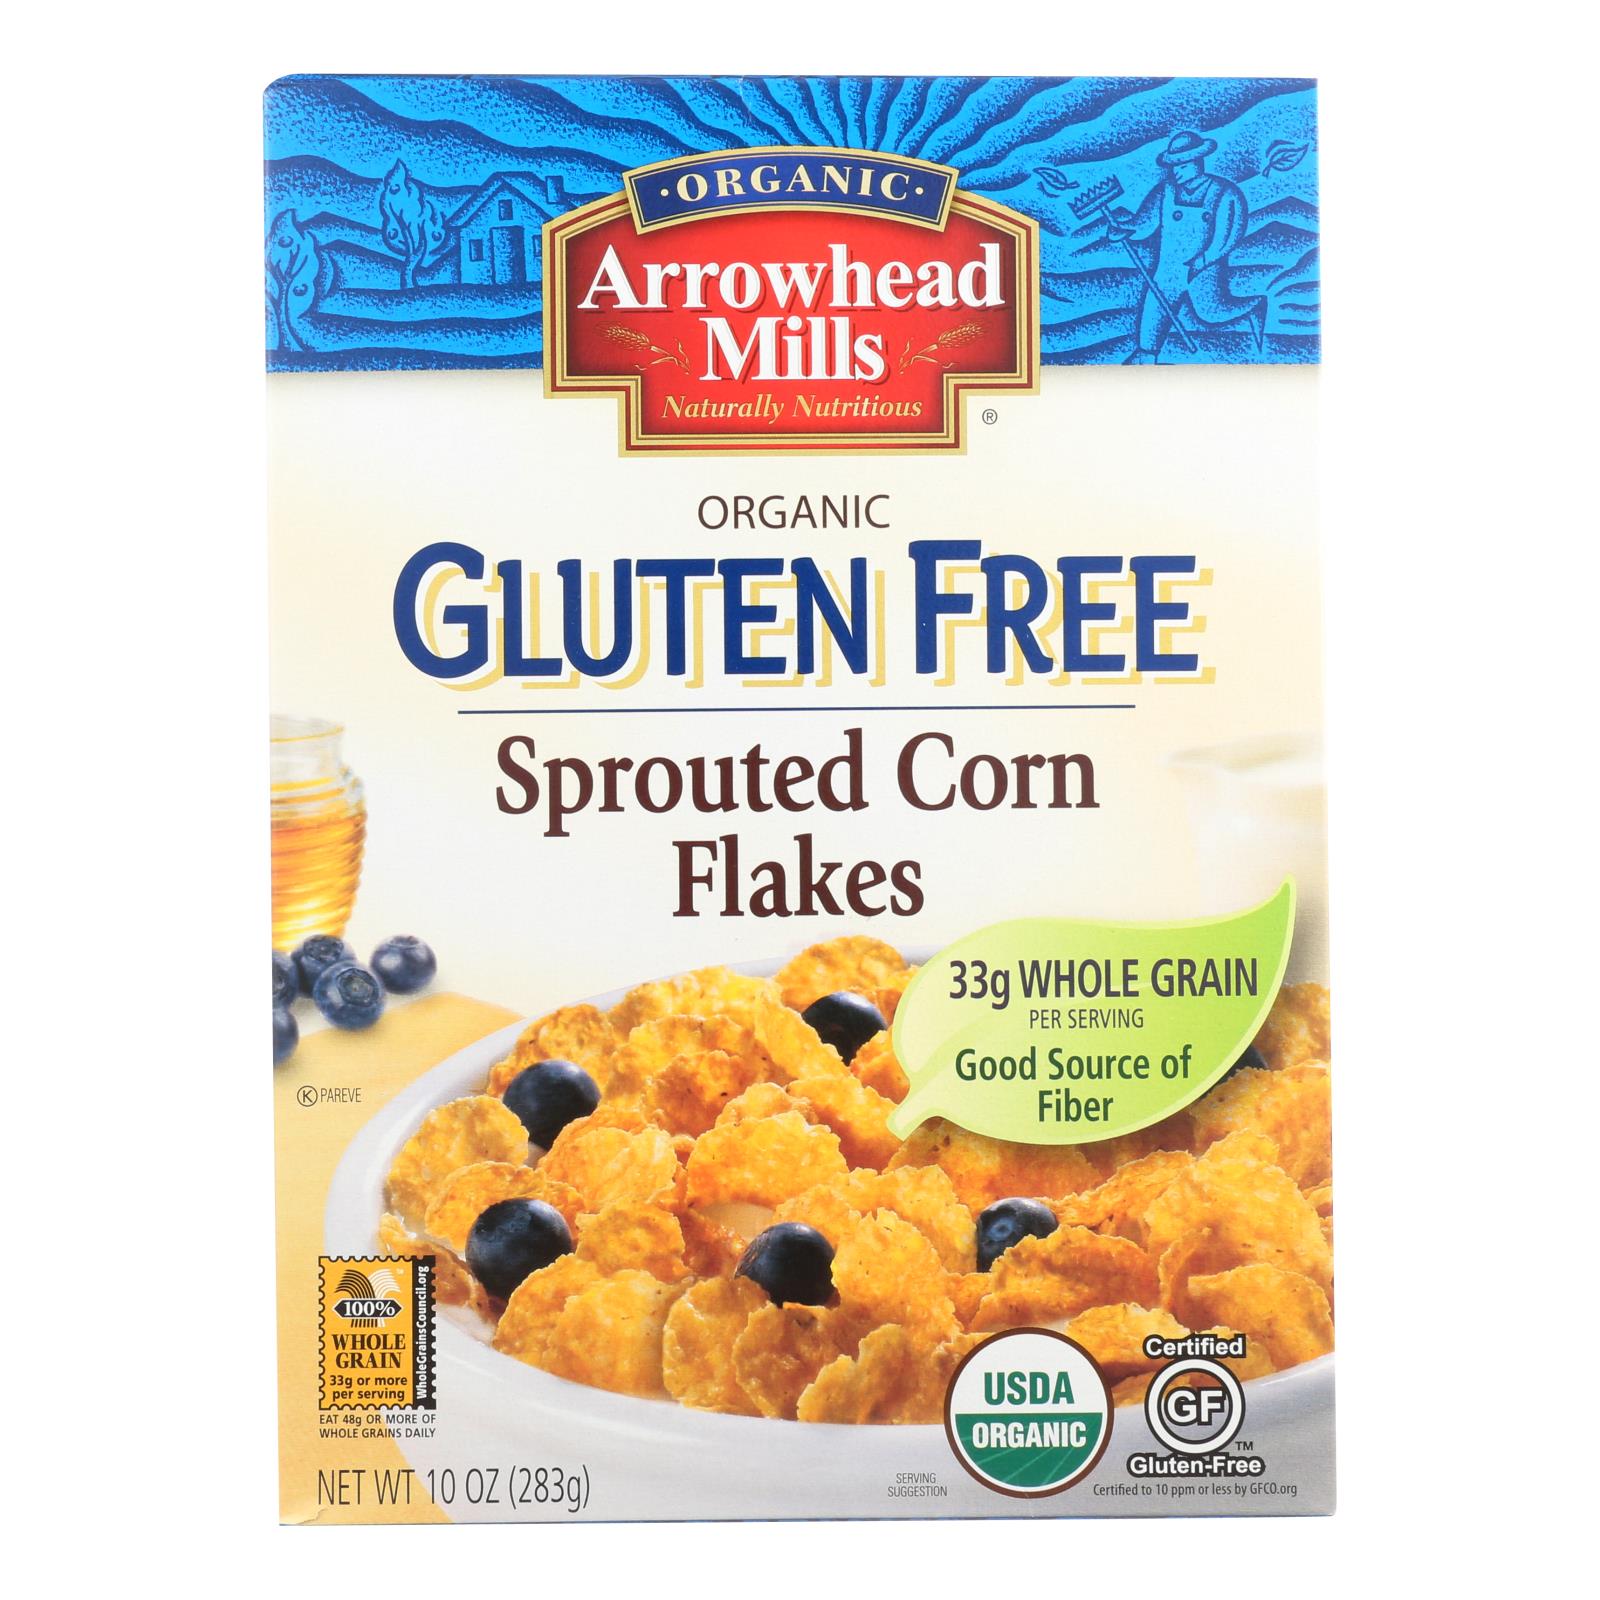 Arrowhead Mills, Arrowhead Mills - Organic Gluten Free Cereal - Sprouted Corn Flakes - Case of 6 - 10 oz (Pack of 6)